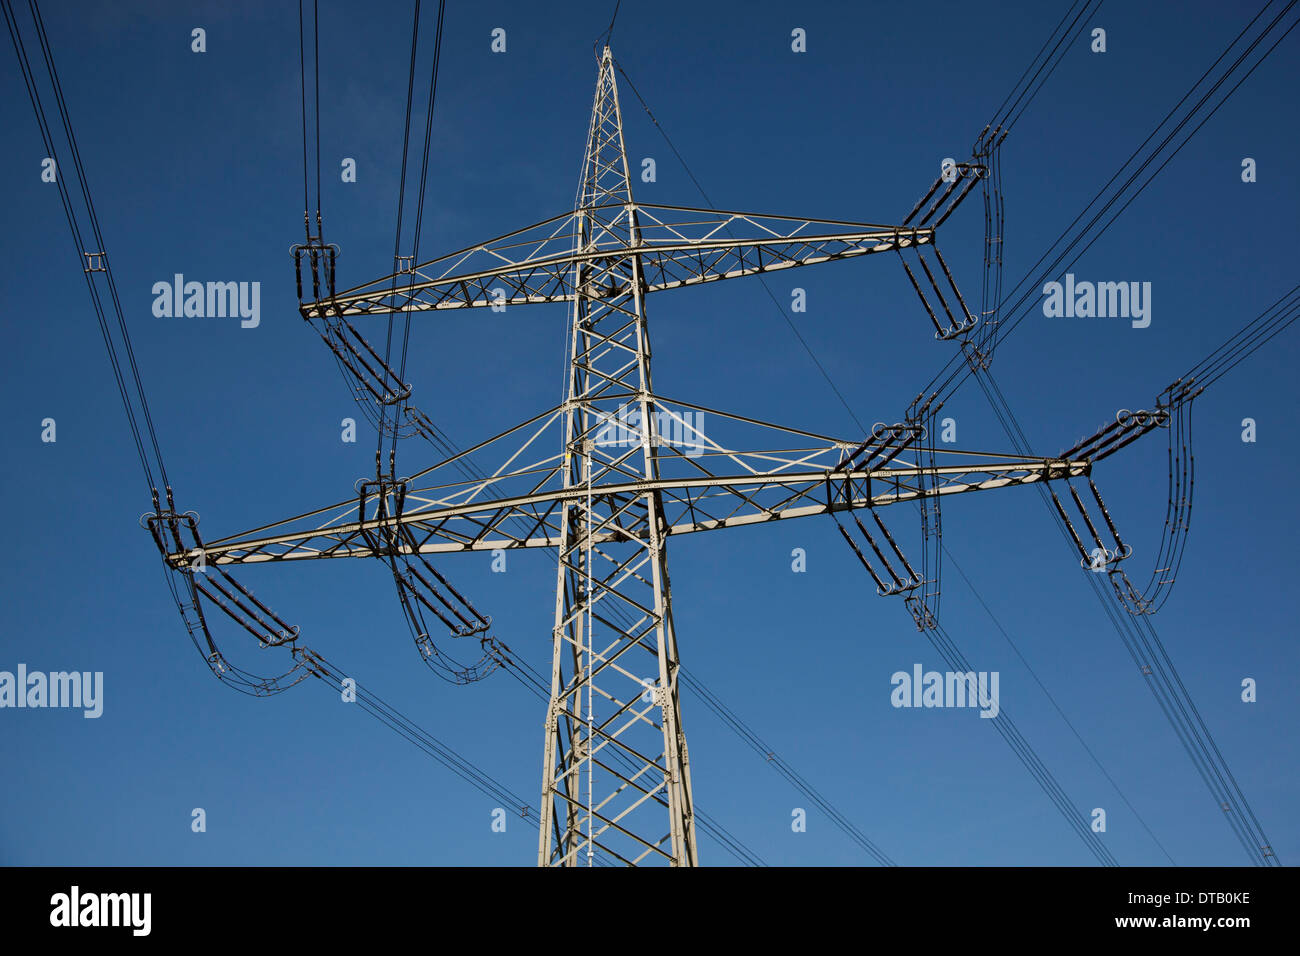 Electricity lines against blue sky Stock Photo